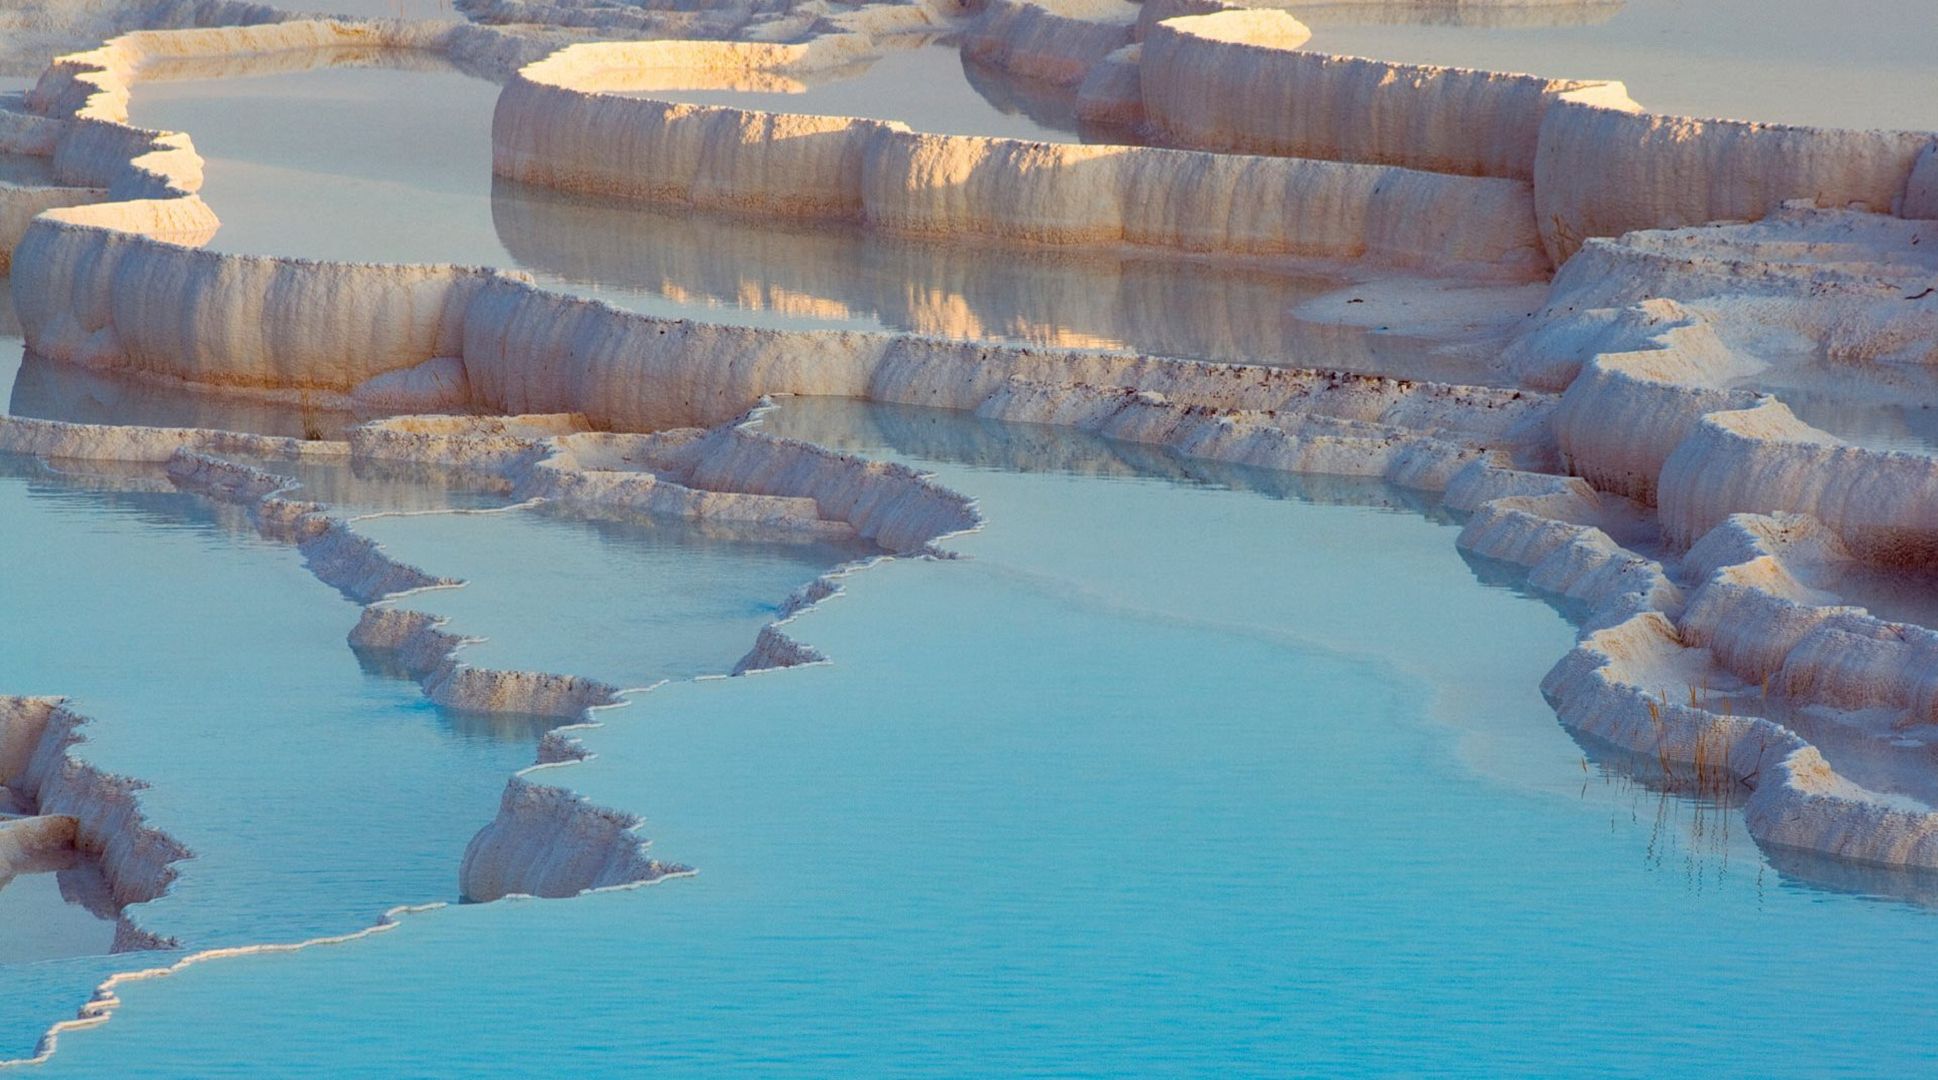 Pamukkale Wallpaper Image Photo Picture Background